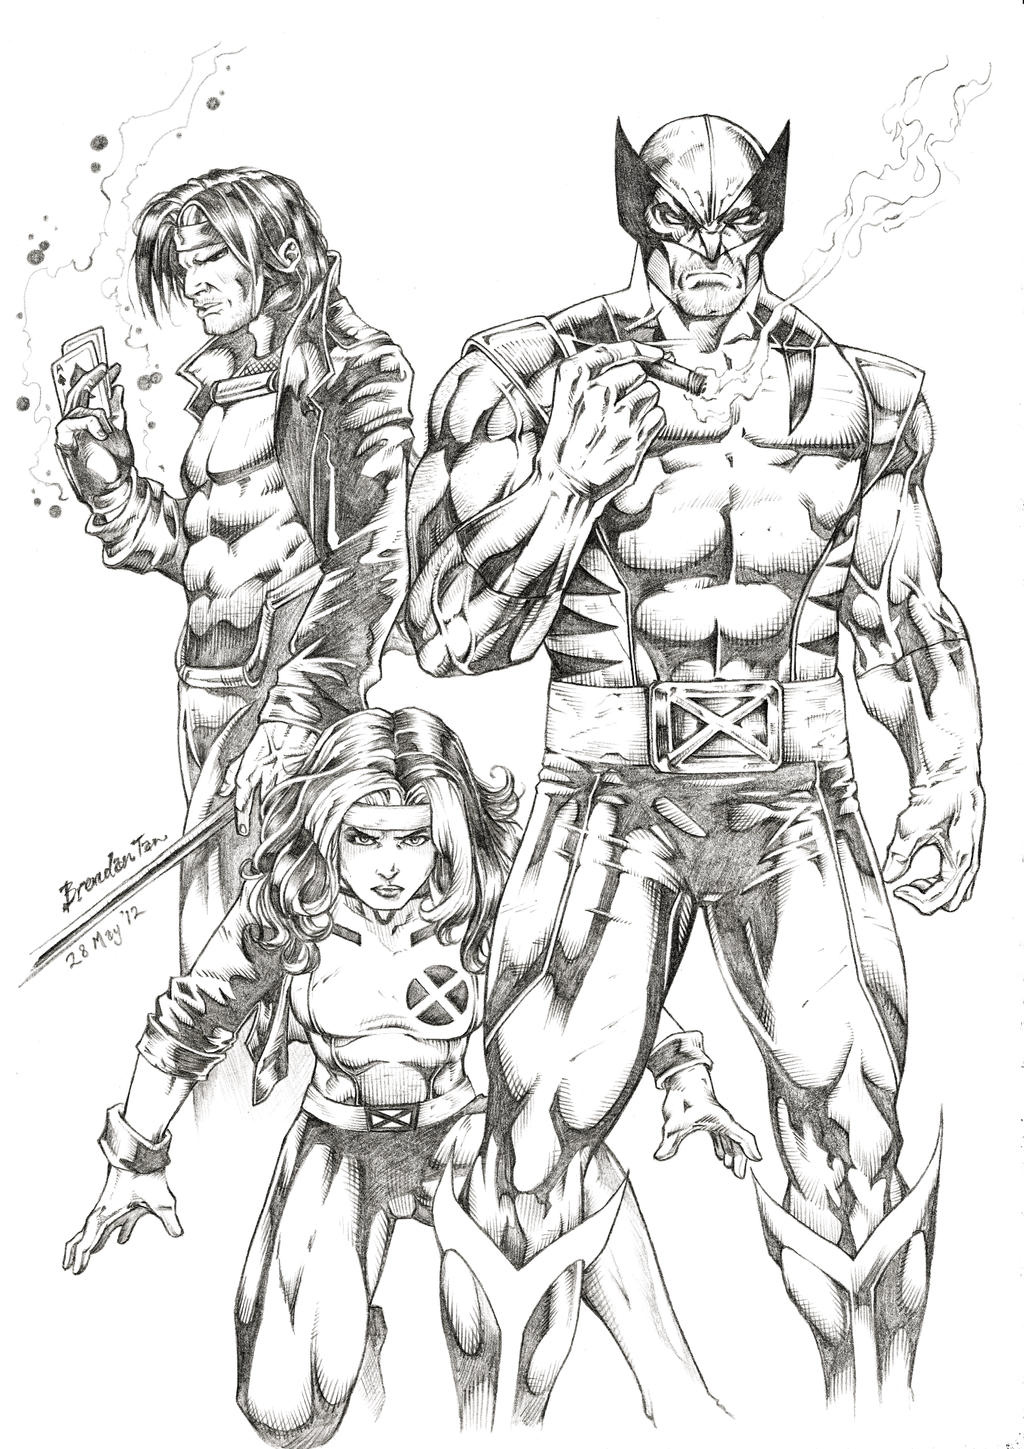 X-Men's Wolverine, Rogue and Gambit